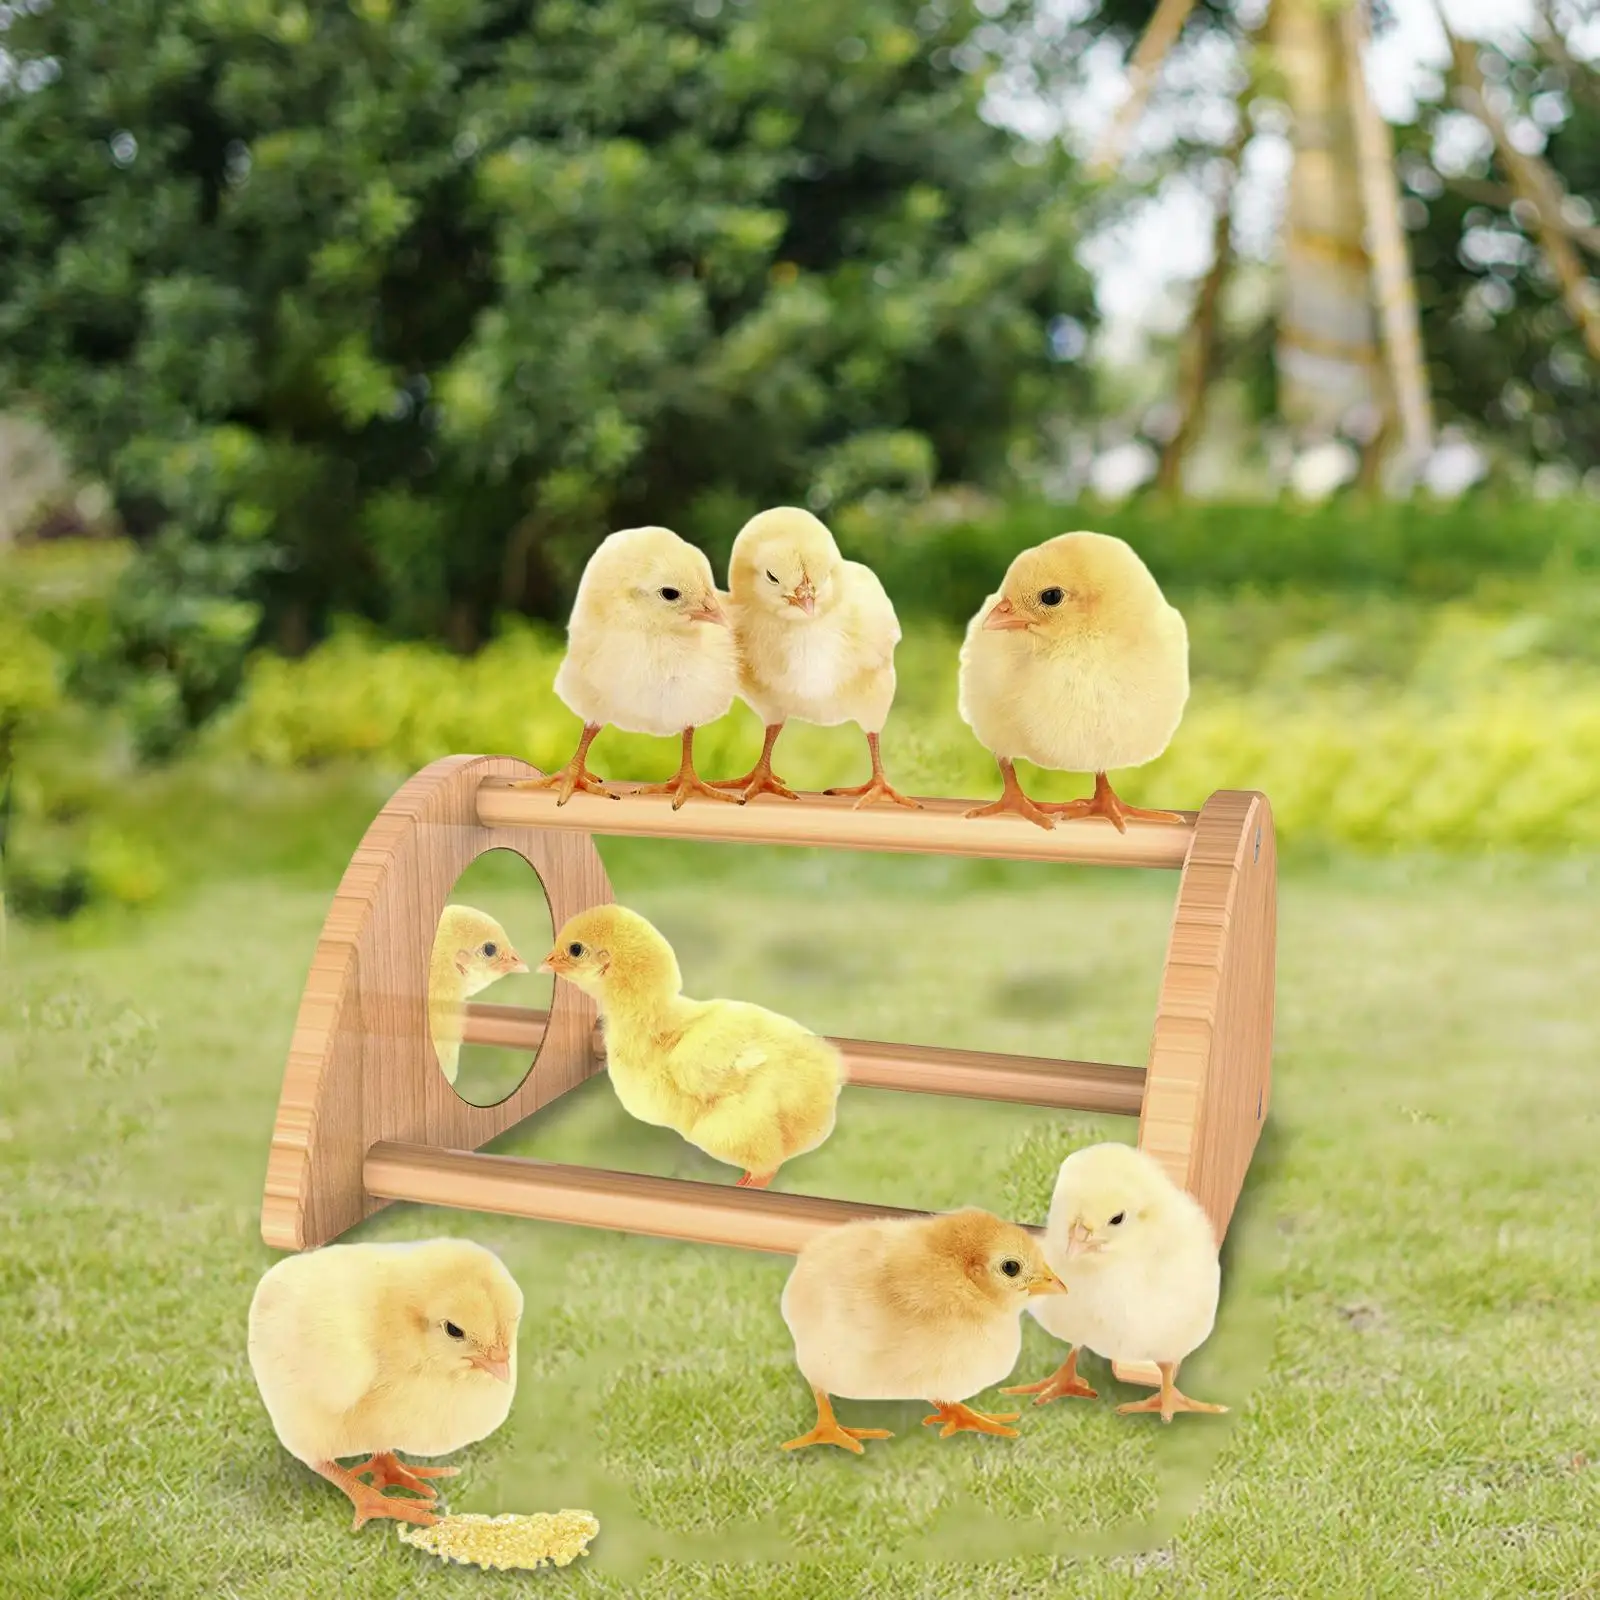 Chicken Perch Roosting Bar Chicken Toys with Mirror Wooden Training Perch Chicken Wood Stand for Macaw Chicken Coop Supplies